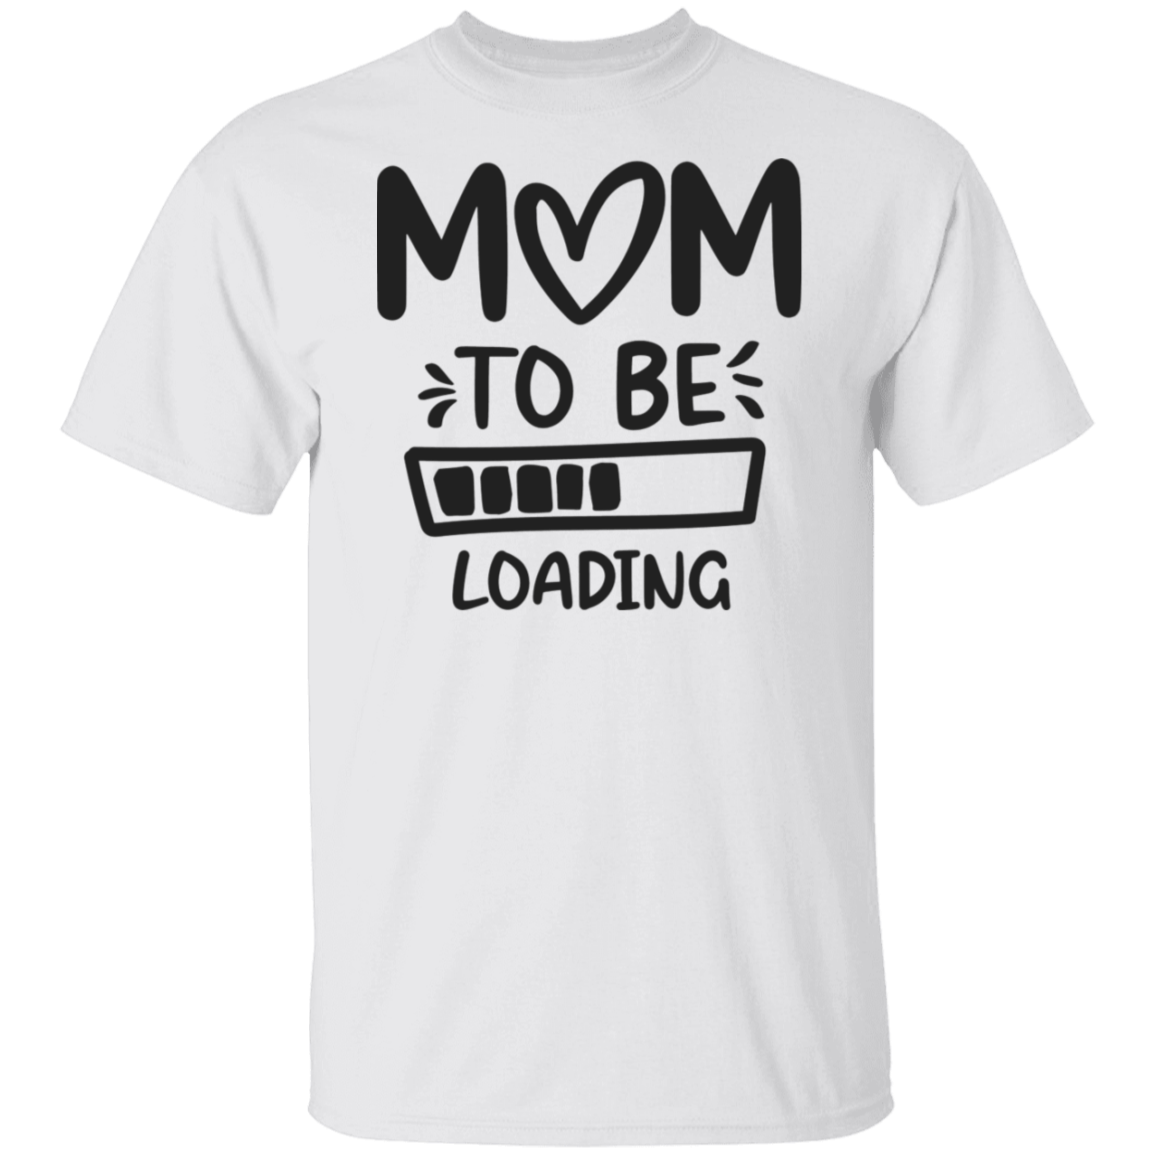 Mom To Be Loading White Print T-Shirt